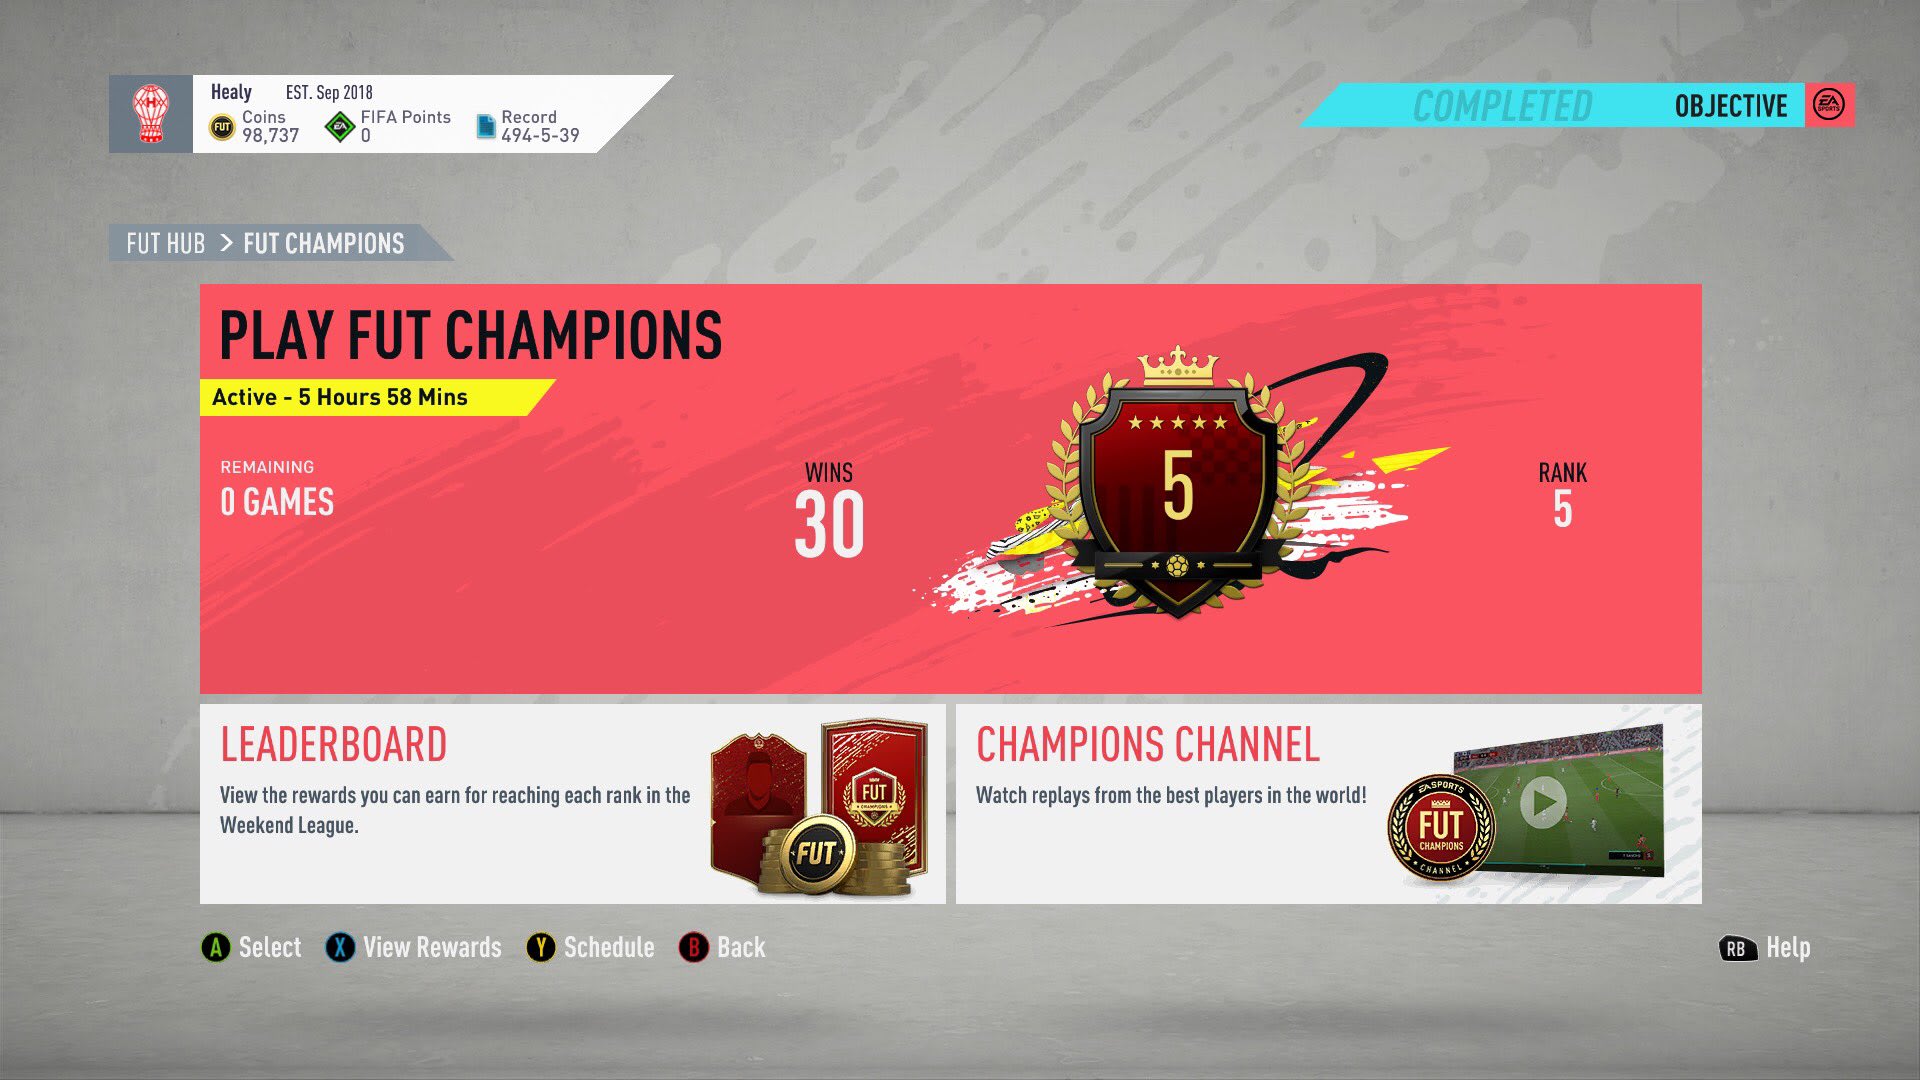 Wade Sandet undertøj Play your fifa fut champions weekend league ps4 or xbox by Healyjn | Fiverr